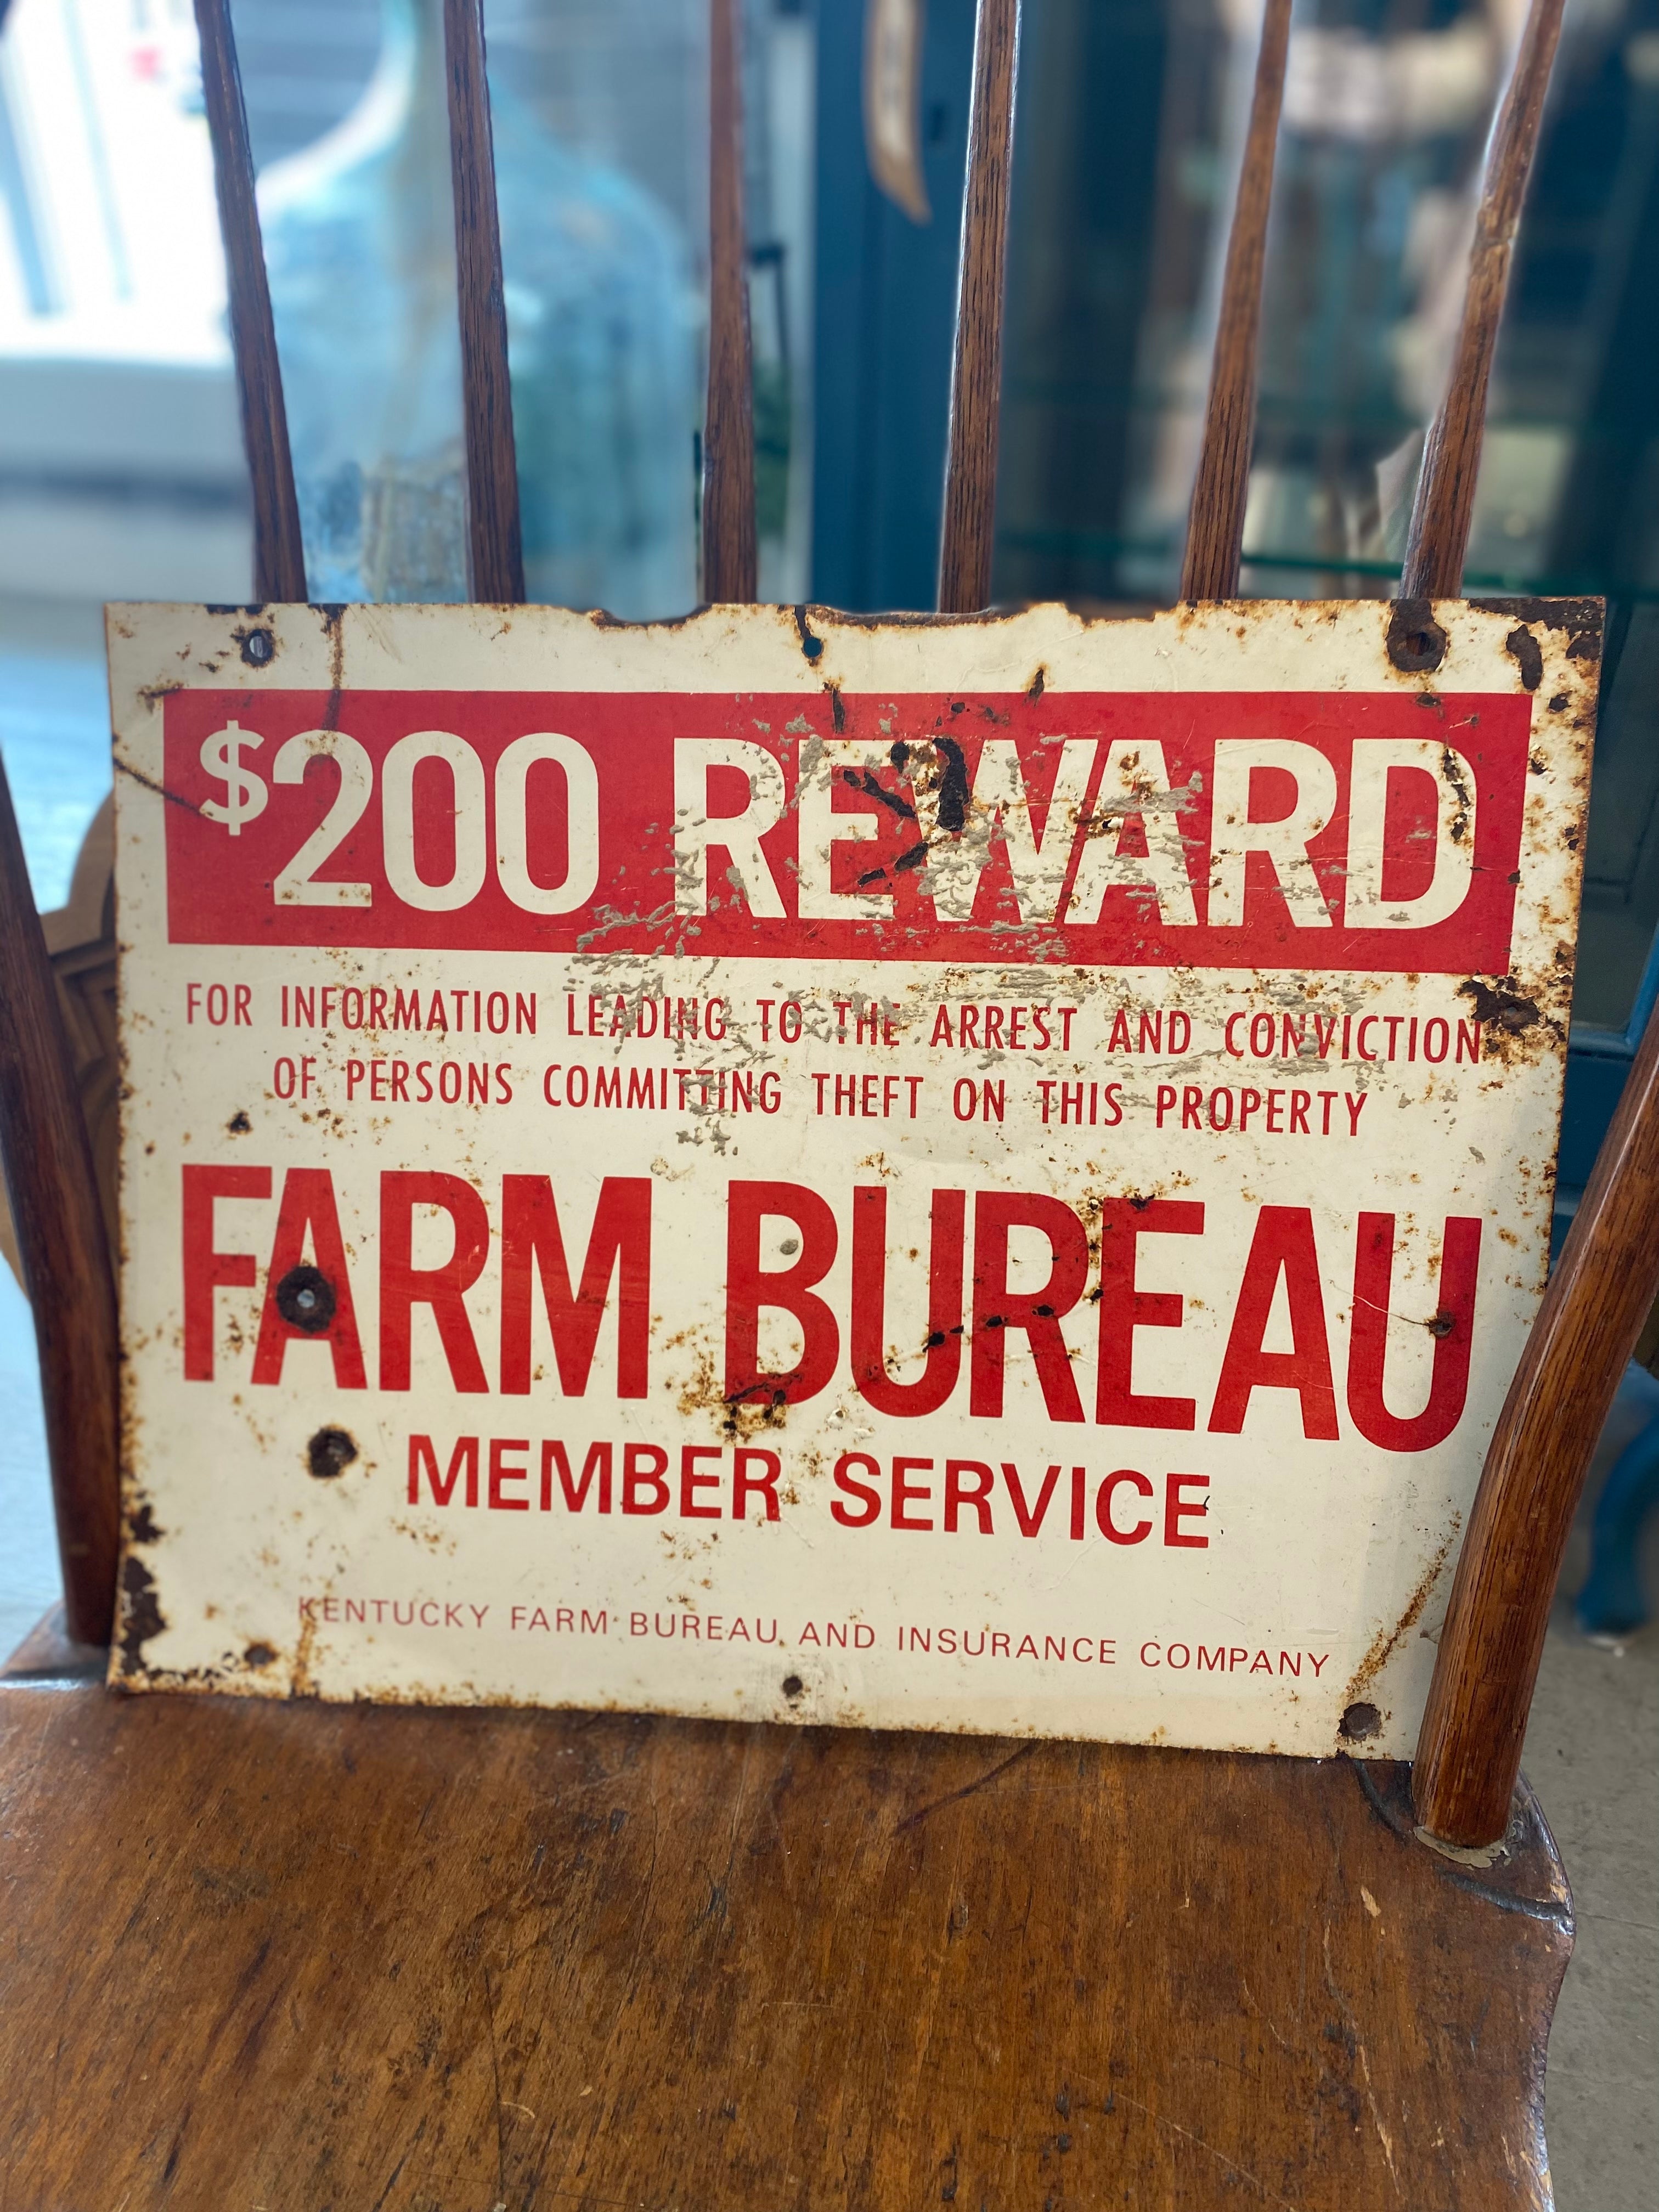 No Trespassing Metal Sign Vintage $200 Reward Farm Bureau The Mustard Seed Collection, The Seed